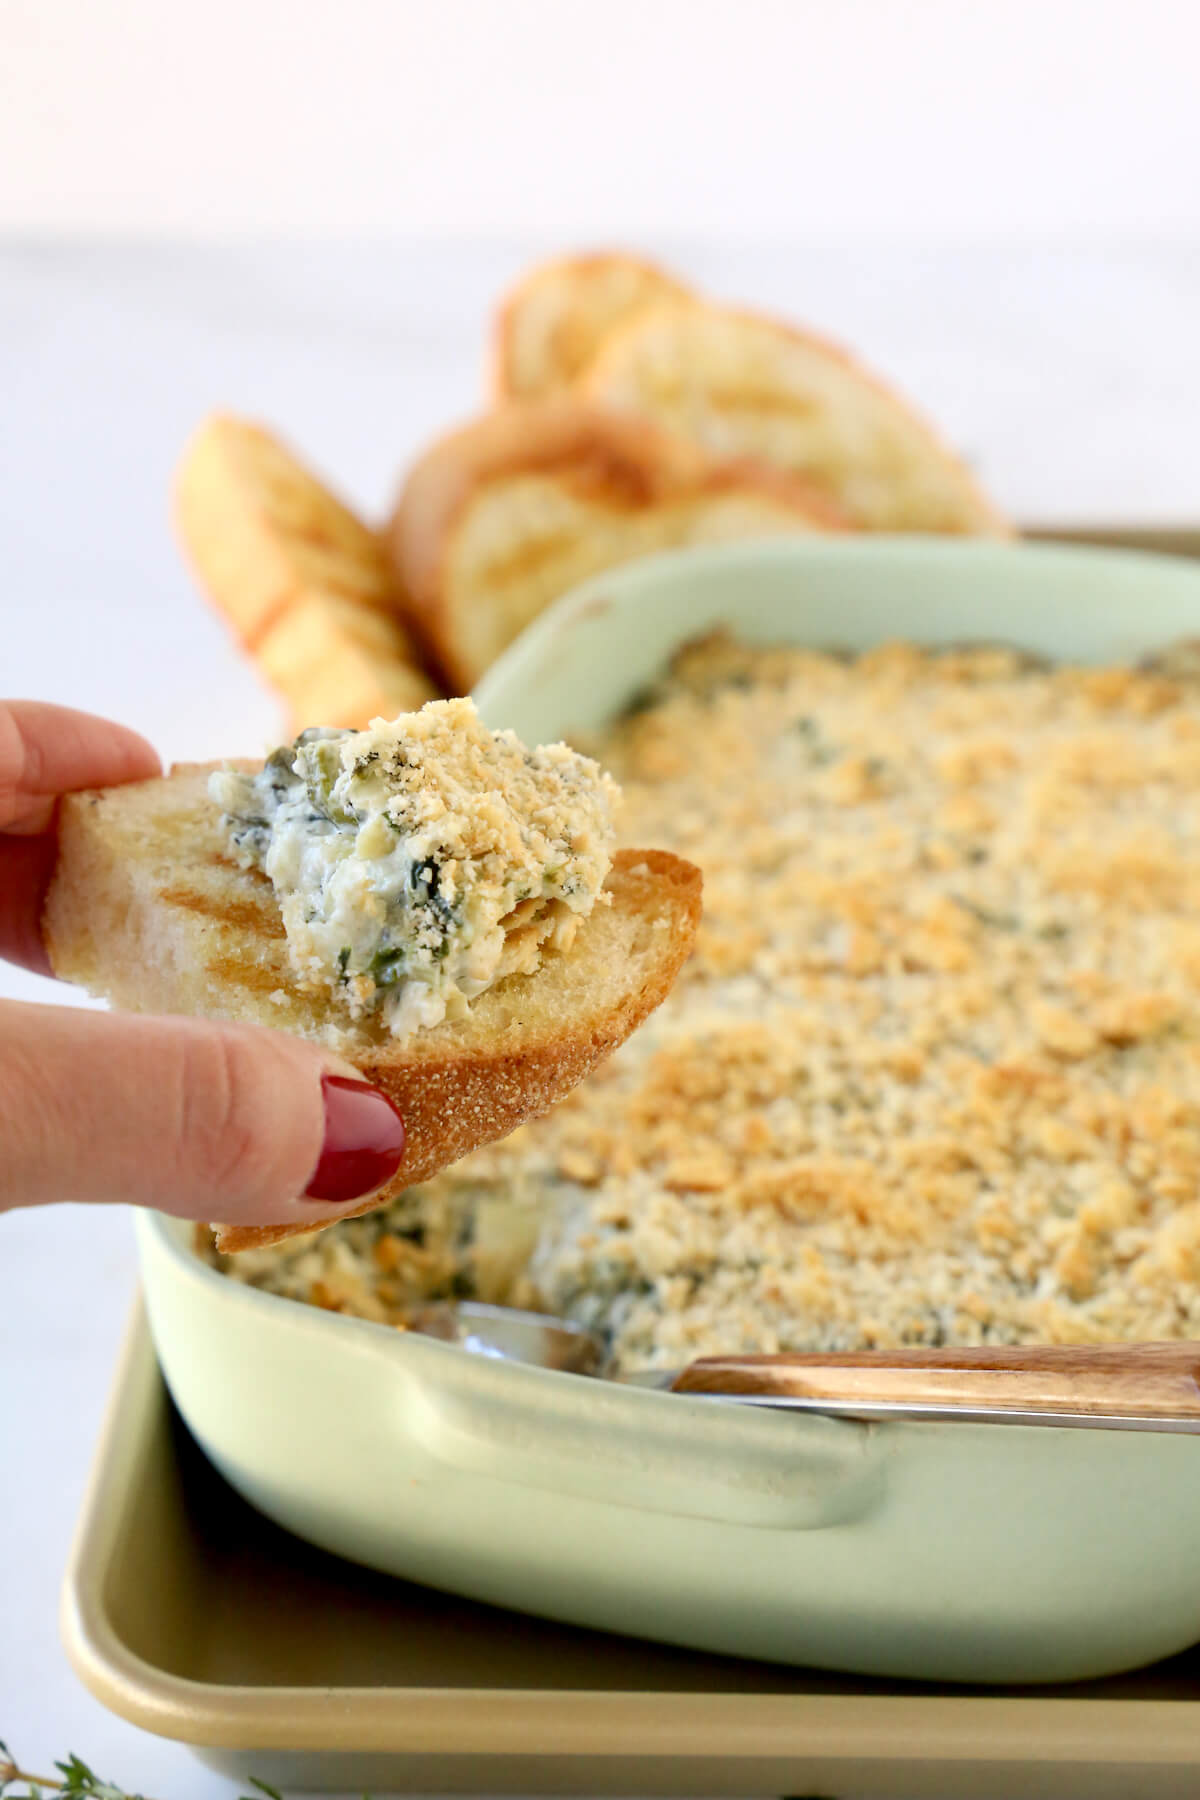 A hand holding a piece of grilled bread with spinach dip on top.